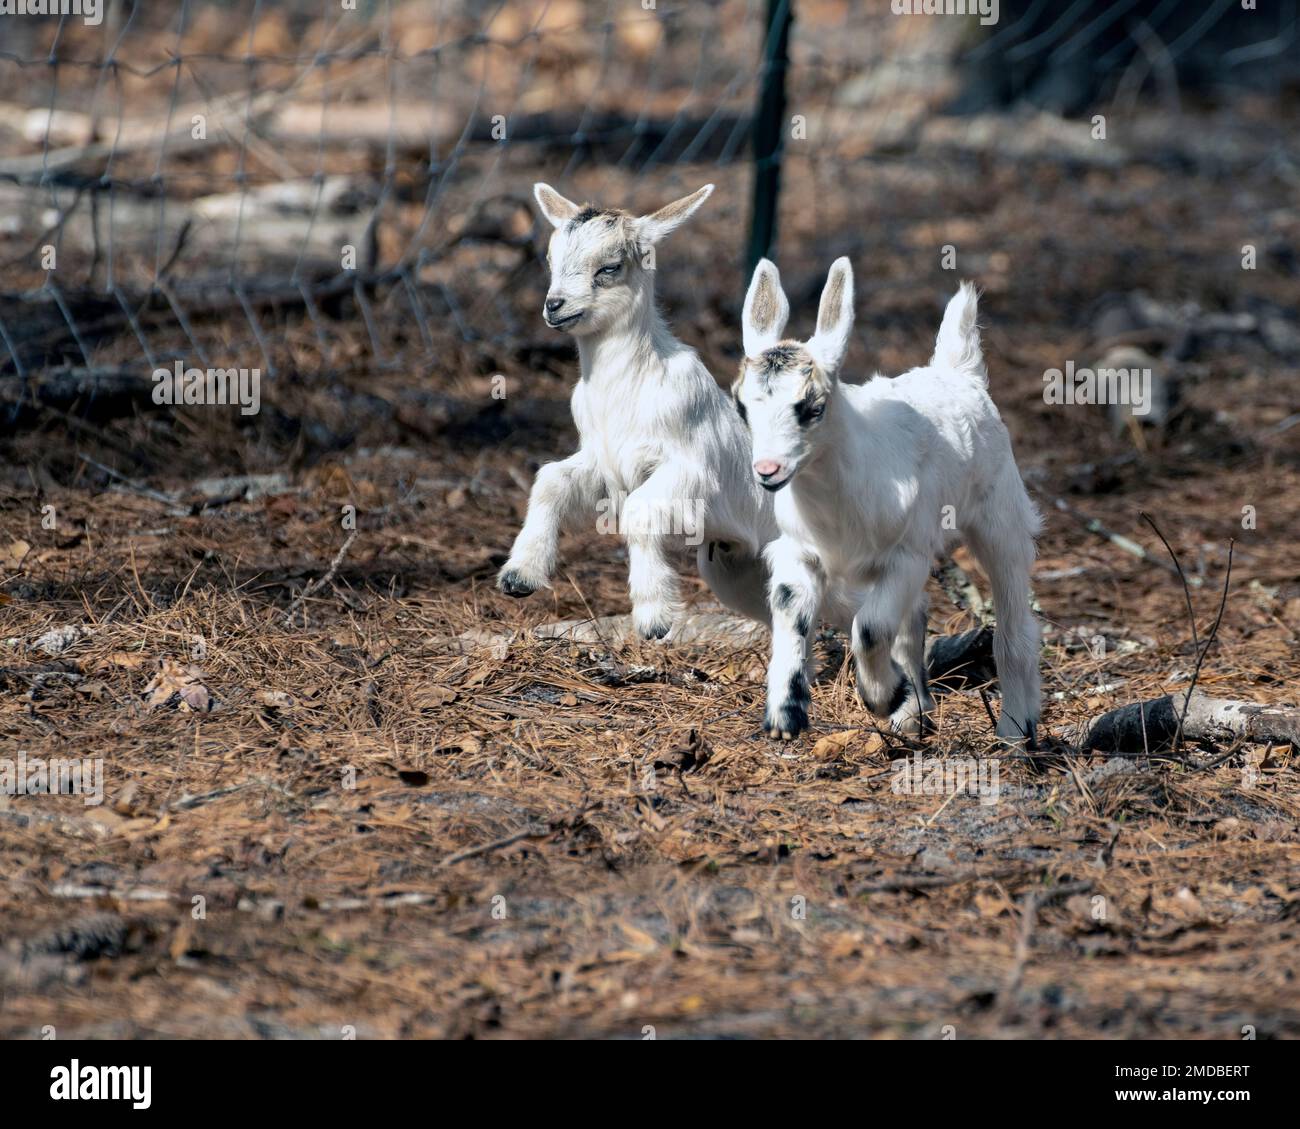 two baby goats running and jumping on a farm Stock Photo